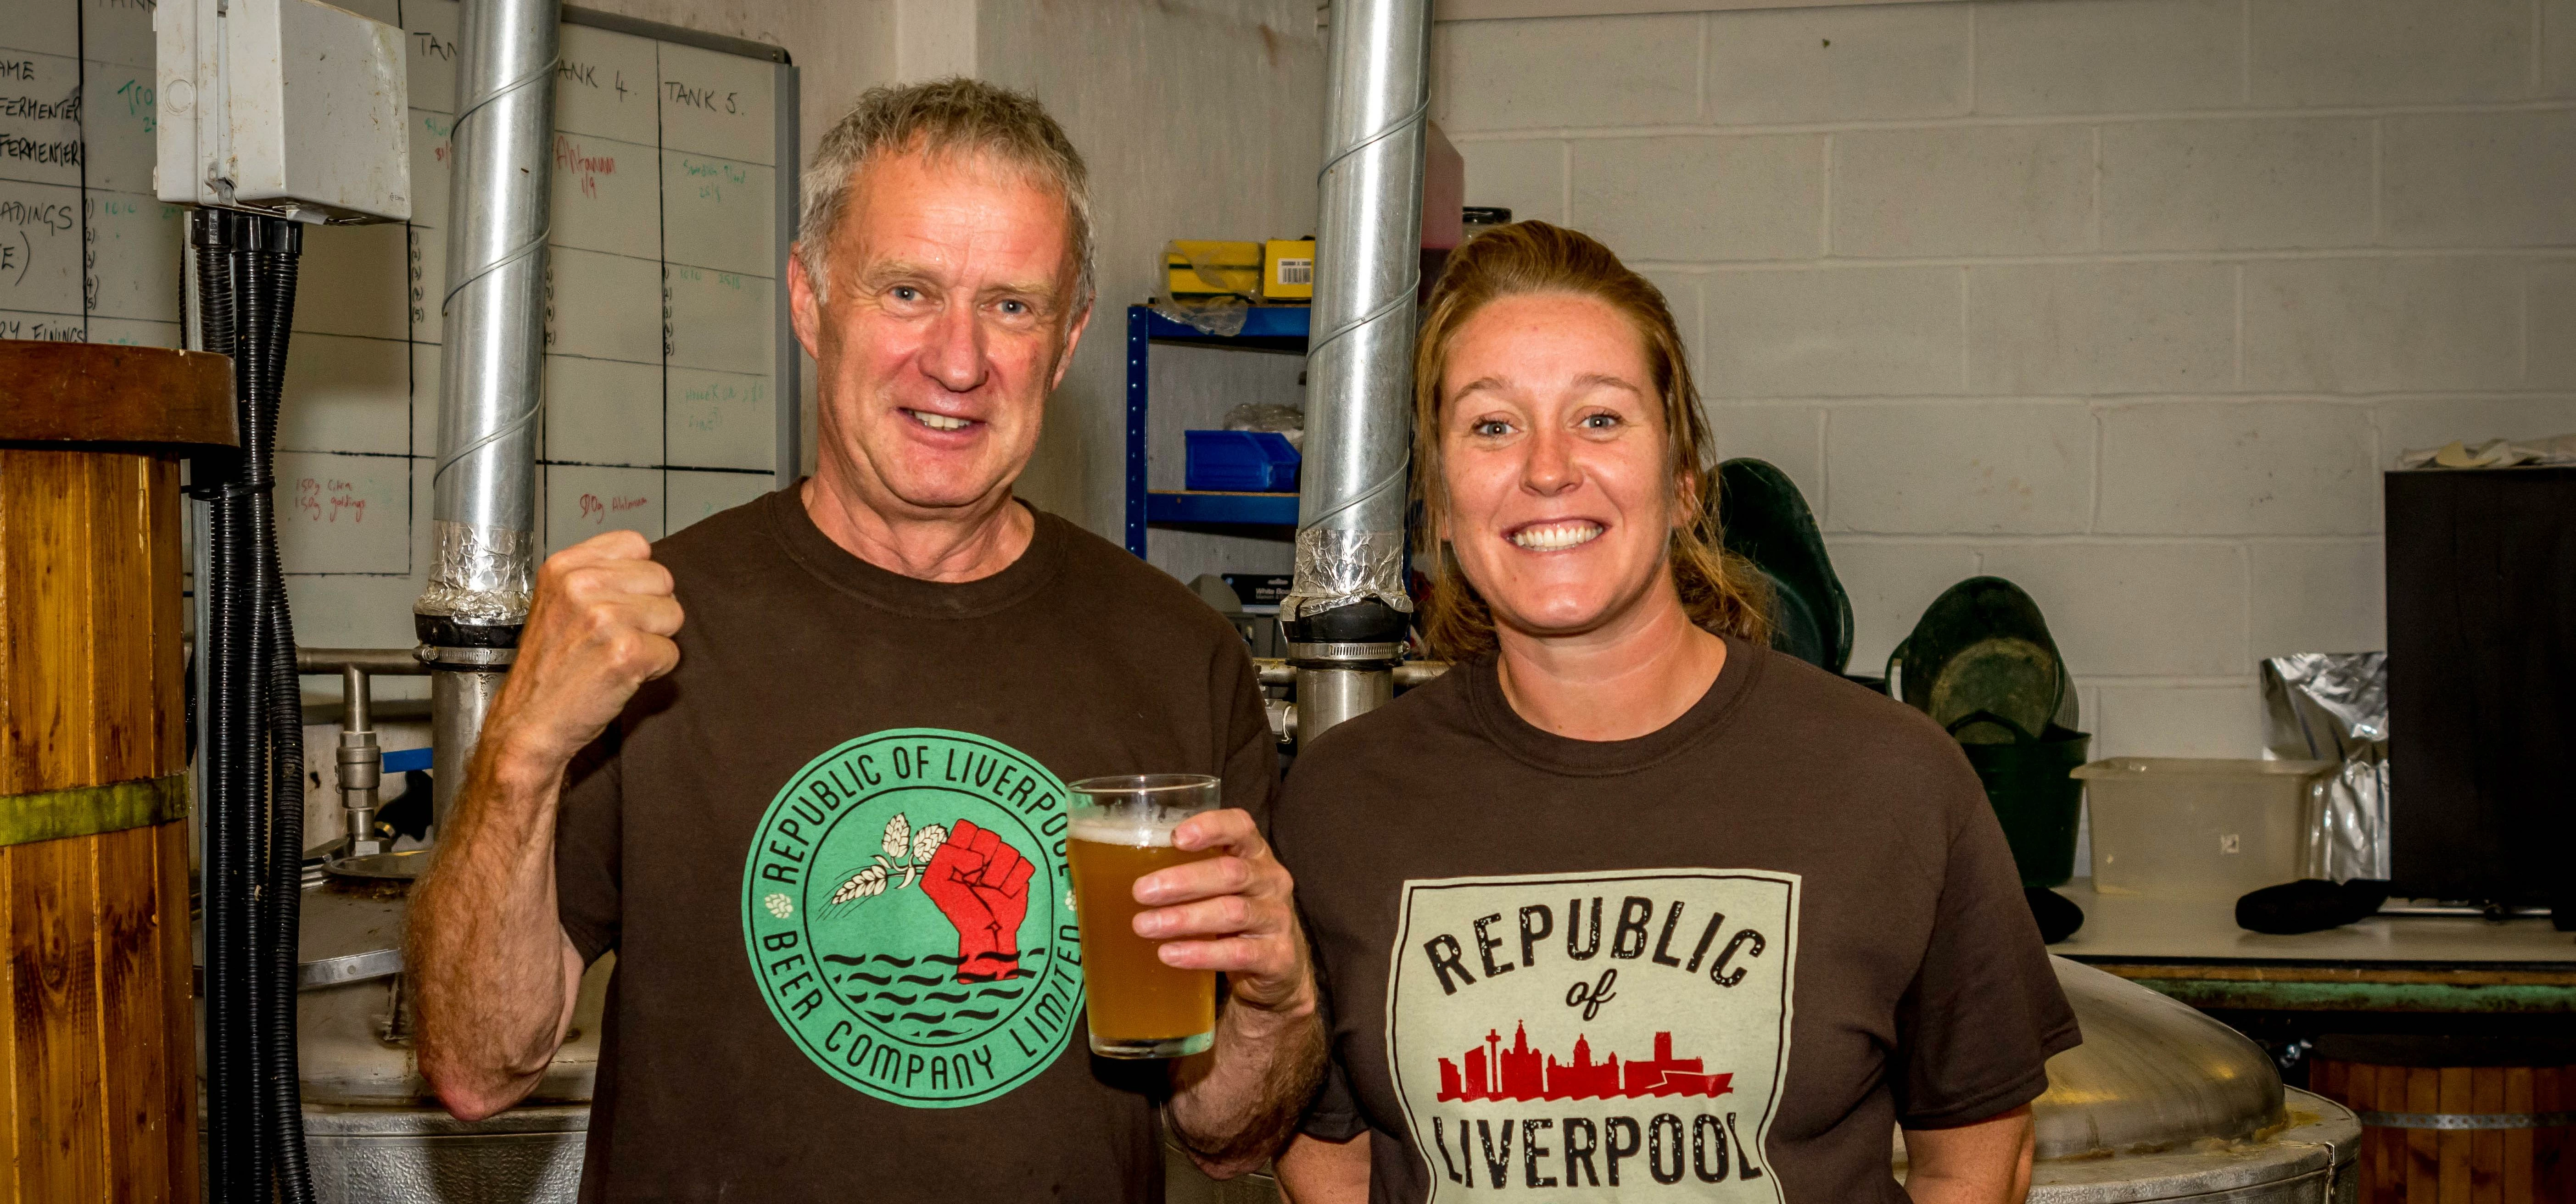 REBEL SPIRIT – Father and daughter team Tony and Liz Rothwell from Republic of Liverpool Beer Compan